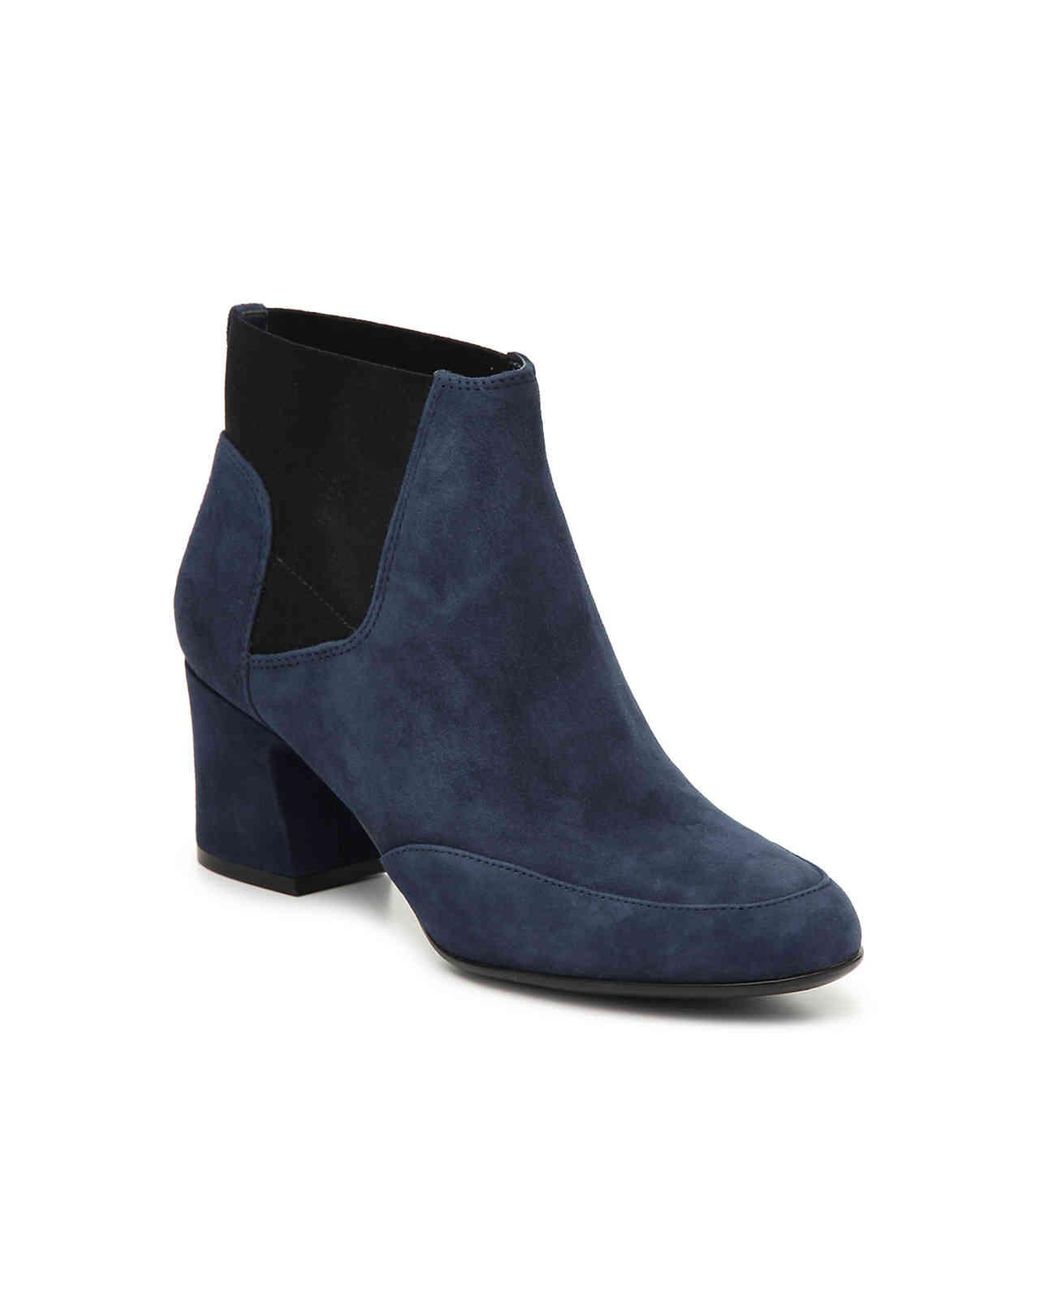 Naturalizer Danica Pull On Block Heel Boots in Navy Suede (Blue) - Save ...